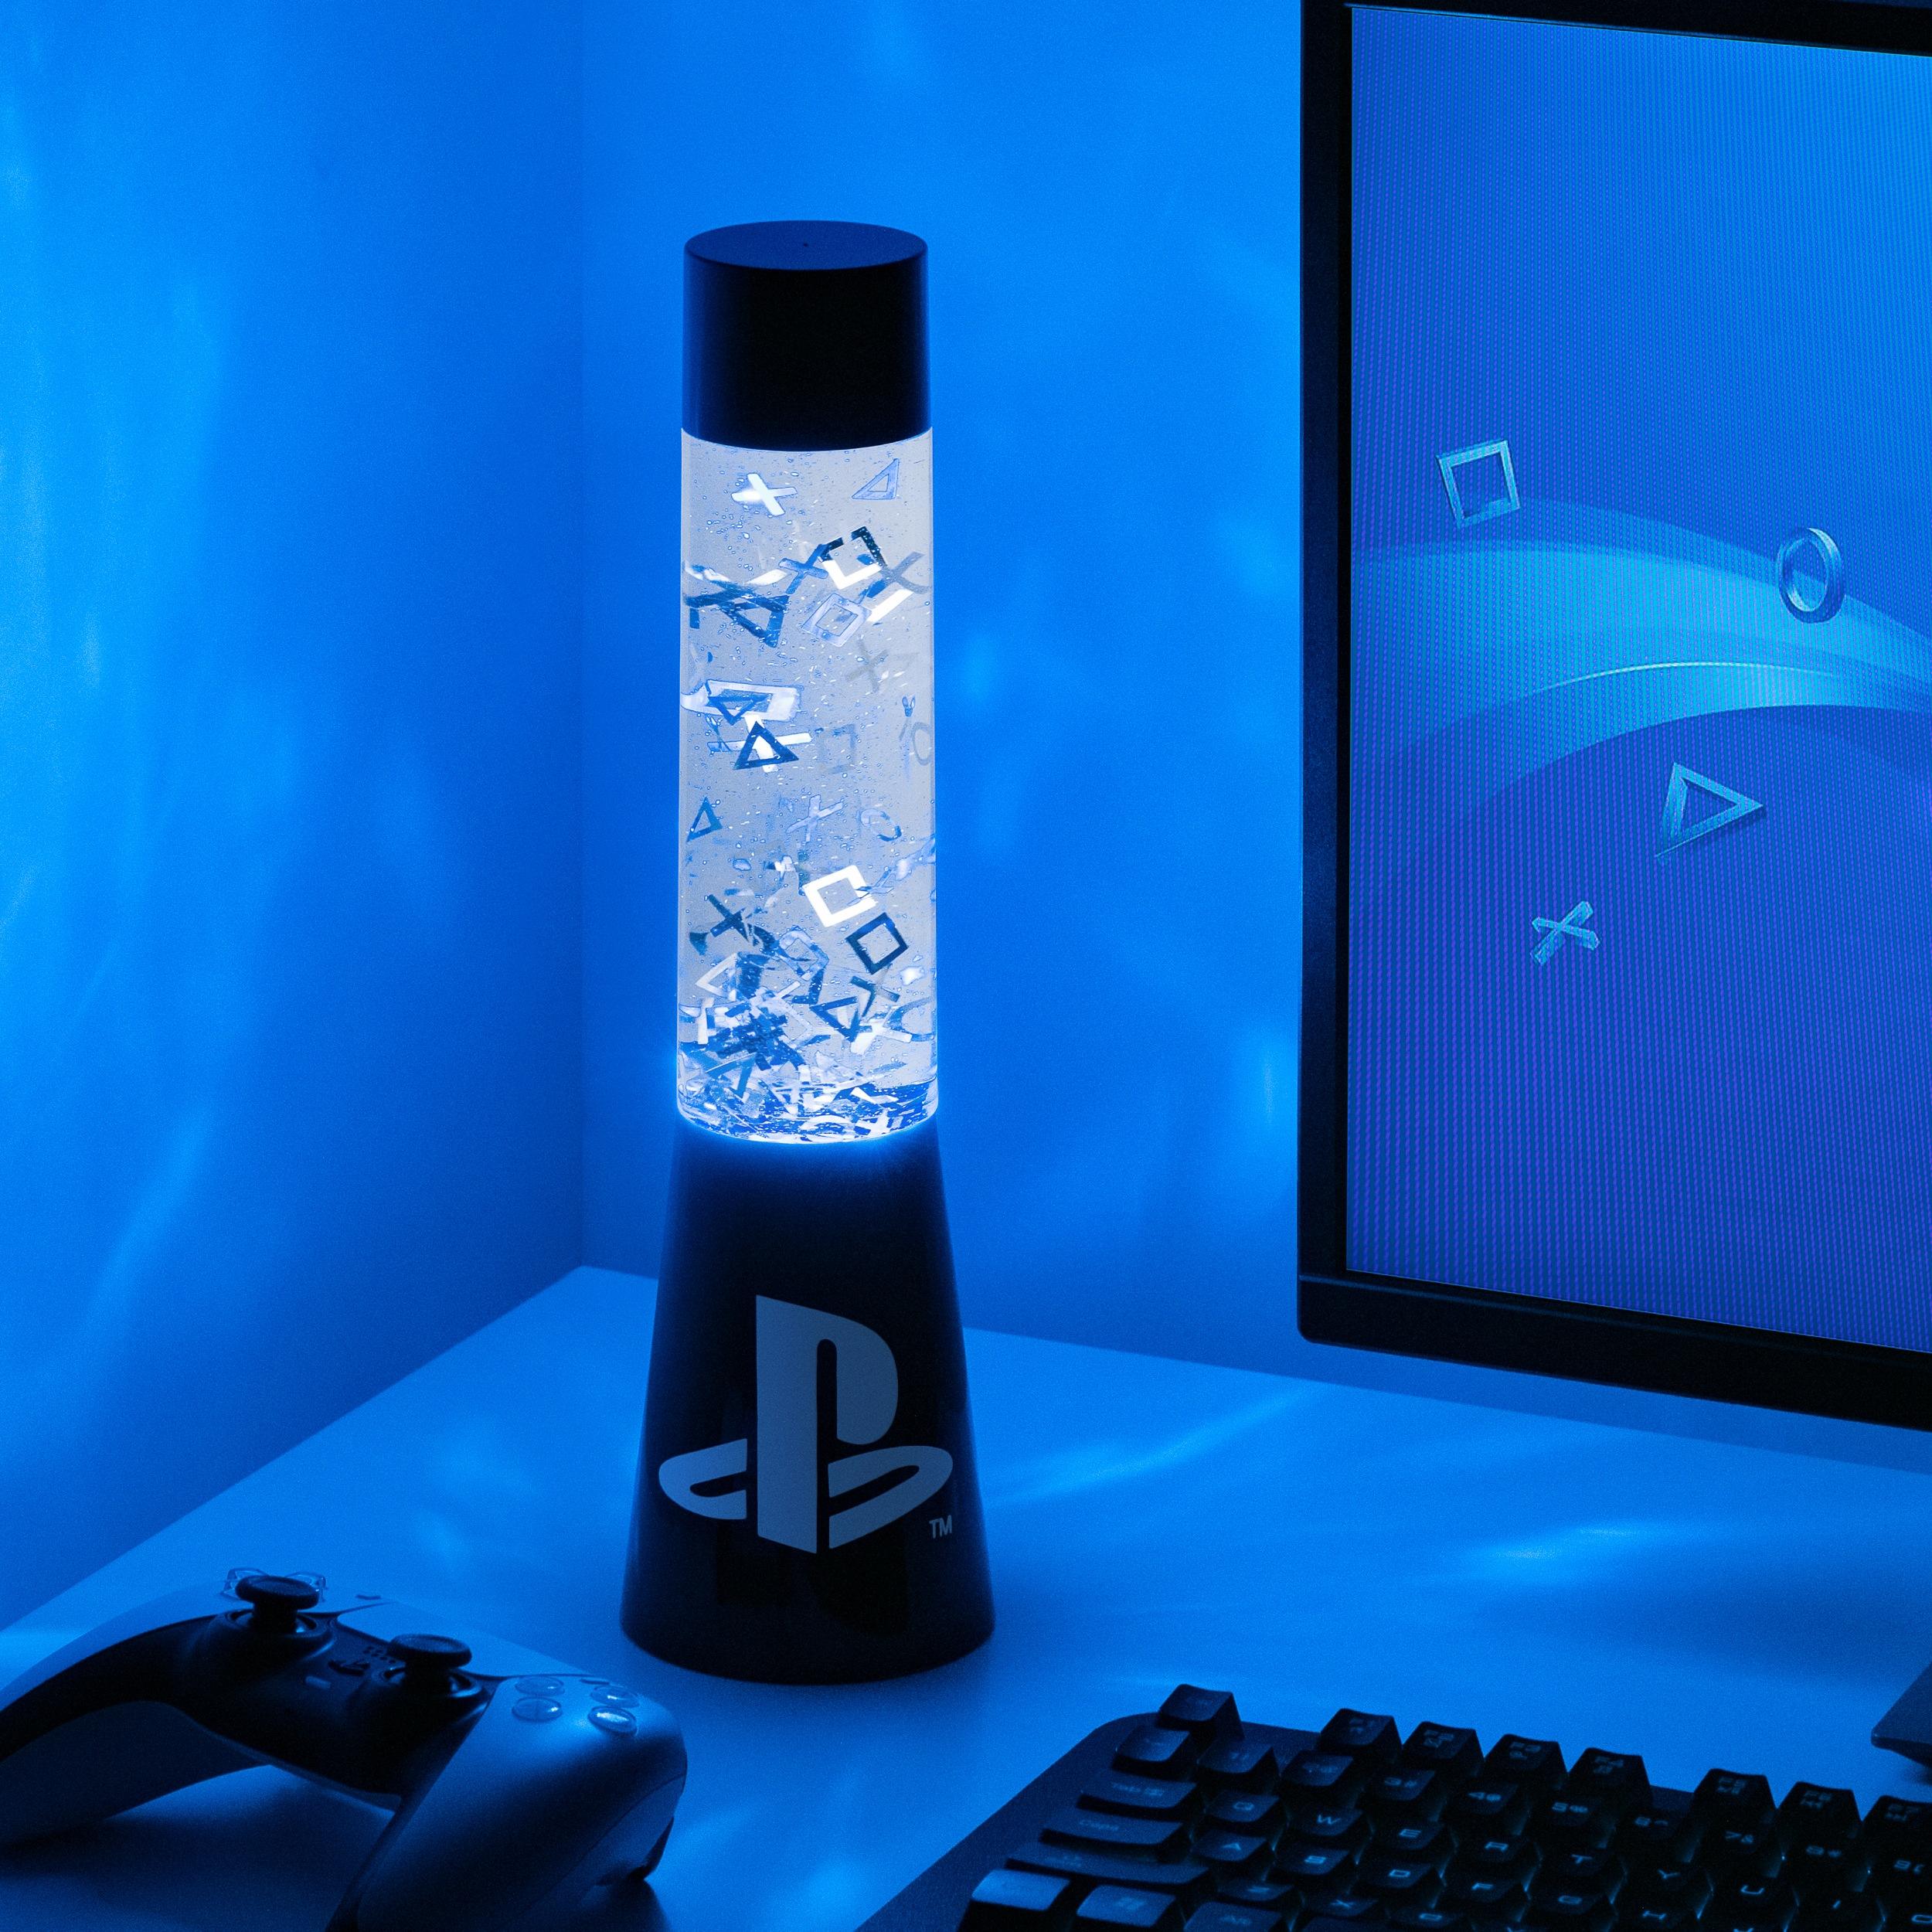 Paladone® Playstation® Icons PP10211PS Officially Licensed 33cm Flow Lamp